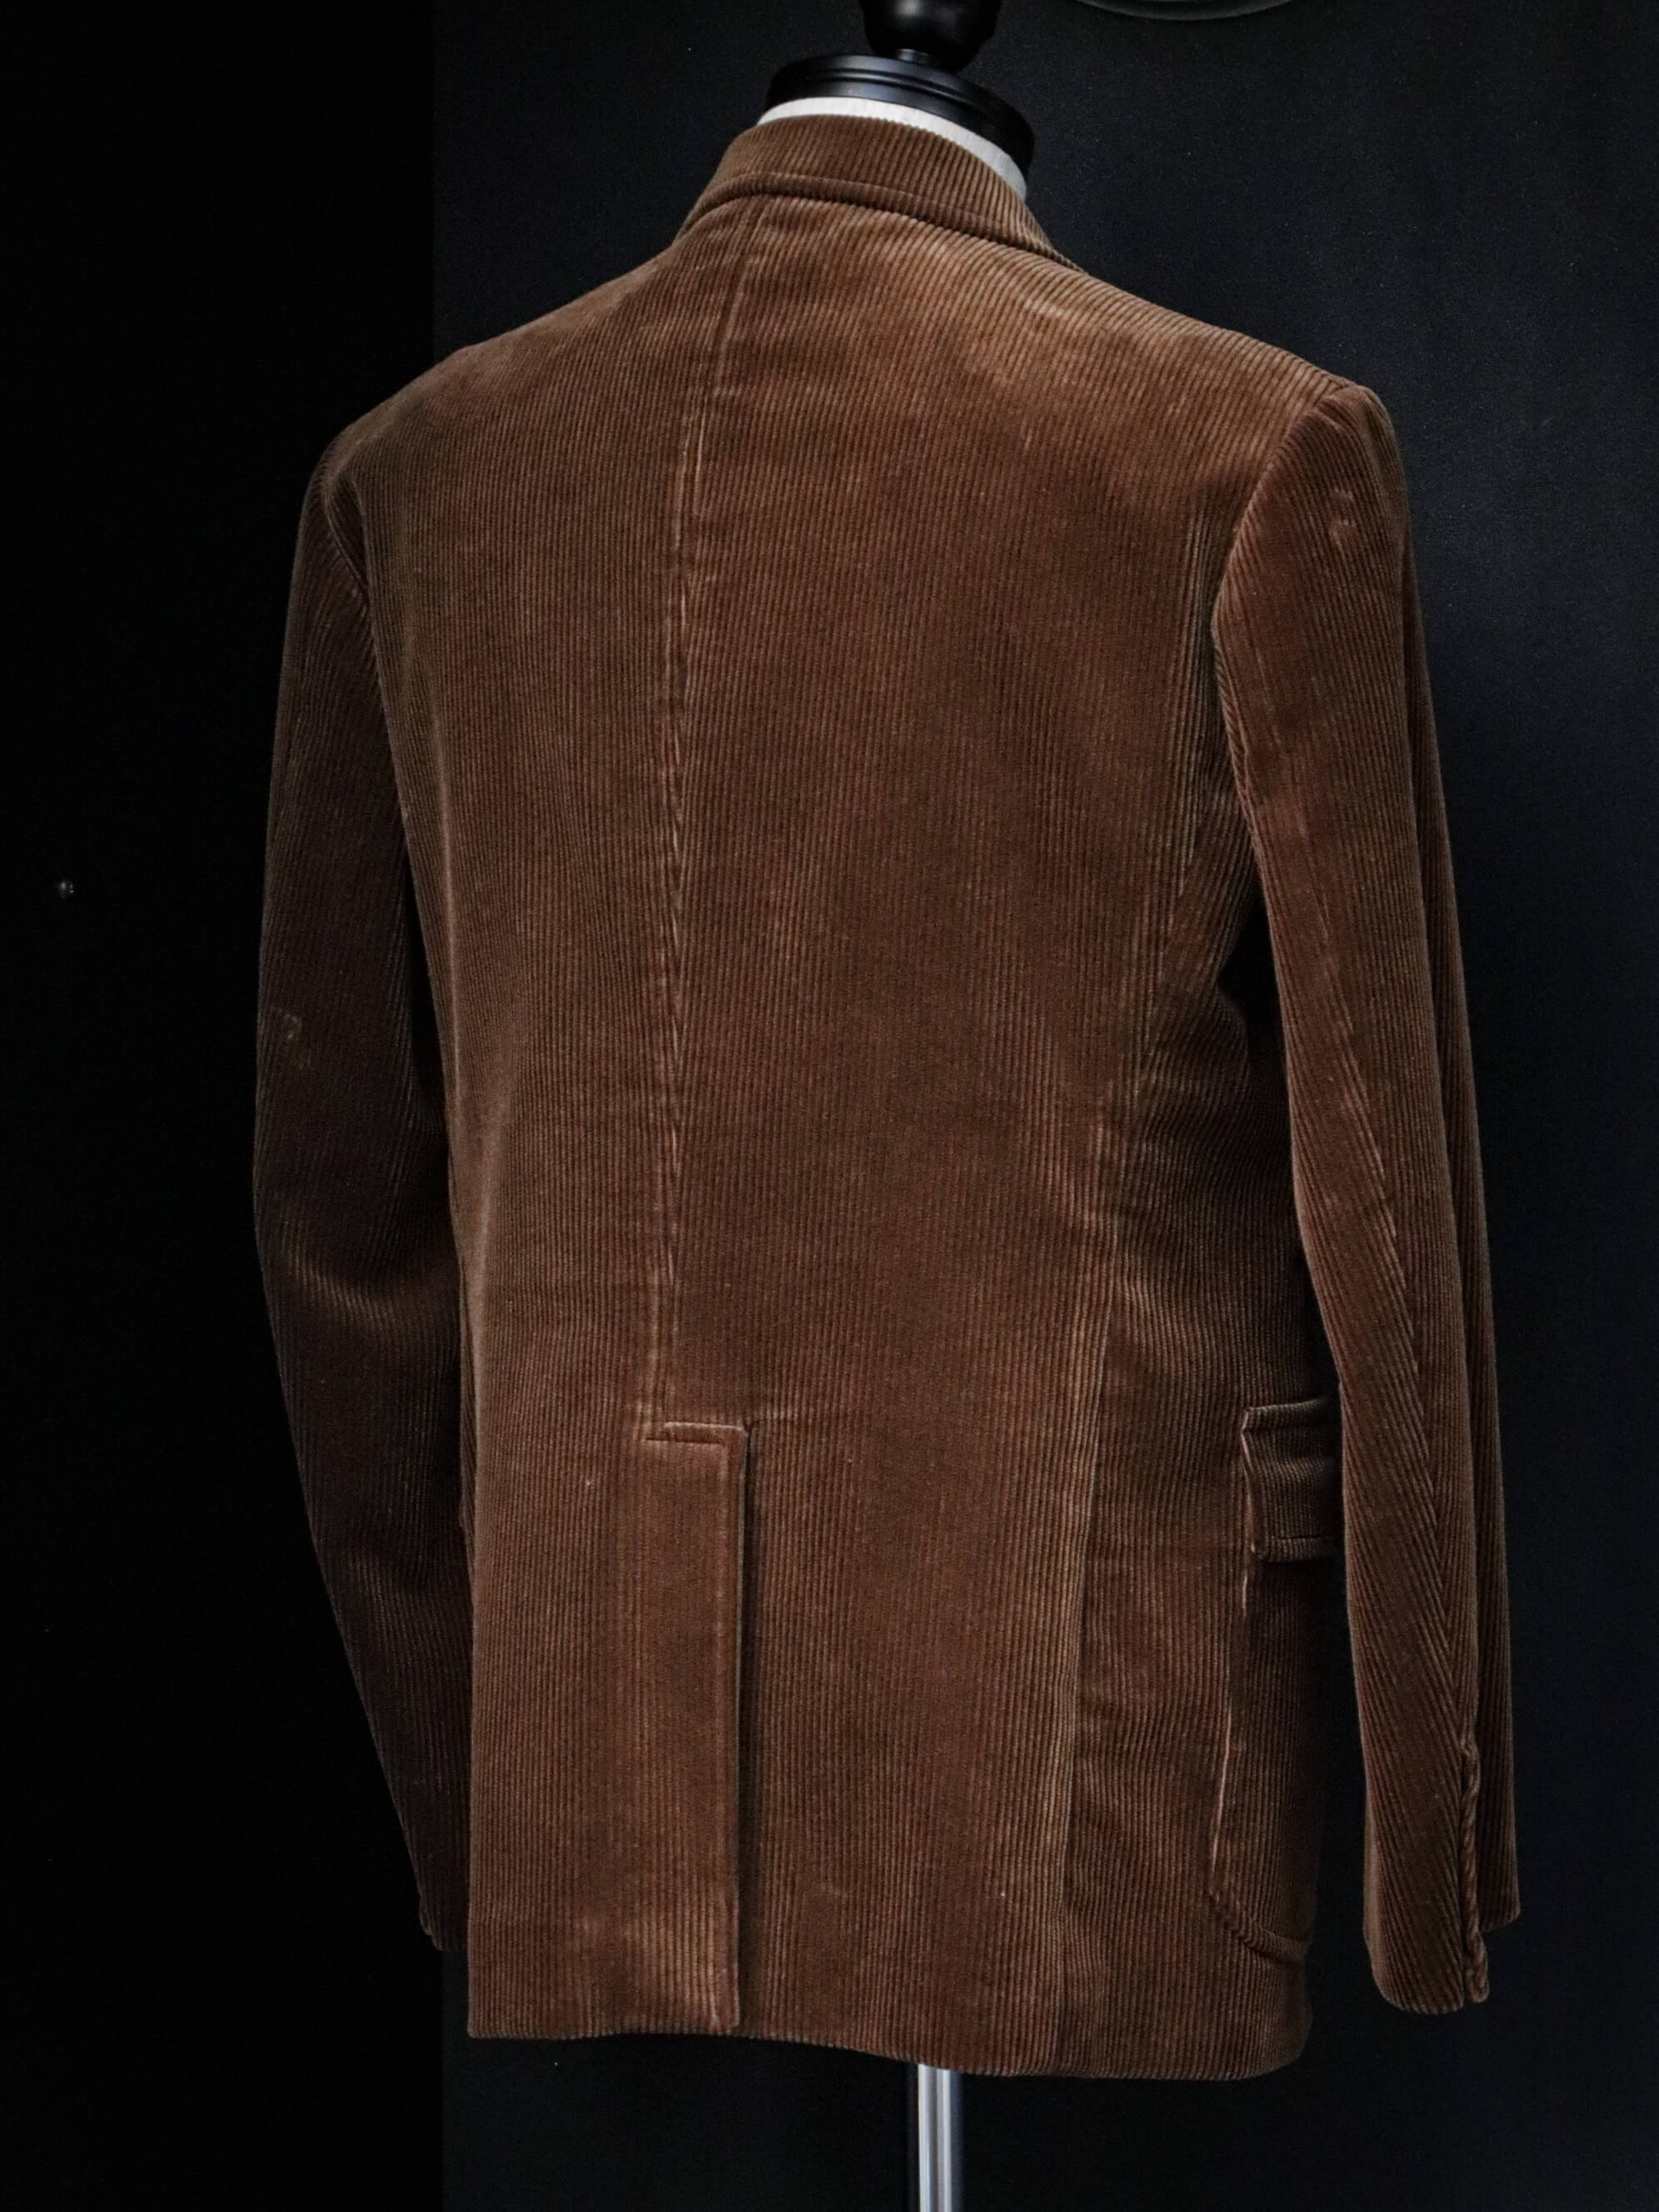 Tailored Jacket 8 Wale Corduroy Brown - BONCOURA - ARCH ONLINE SHOP